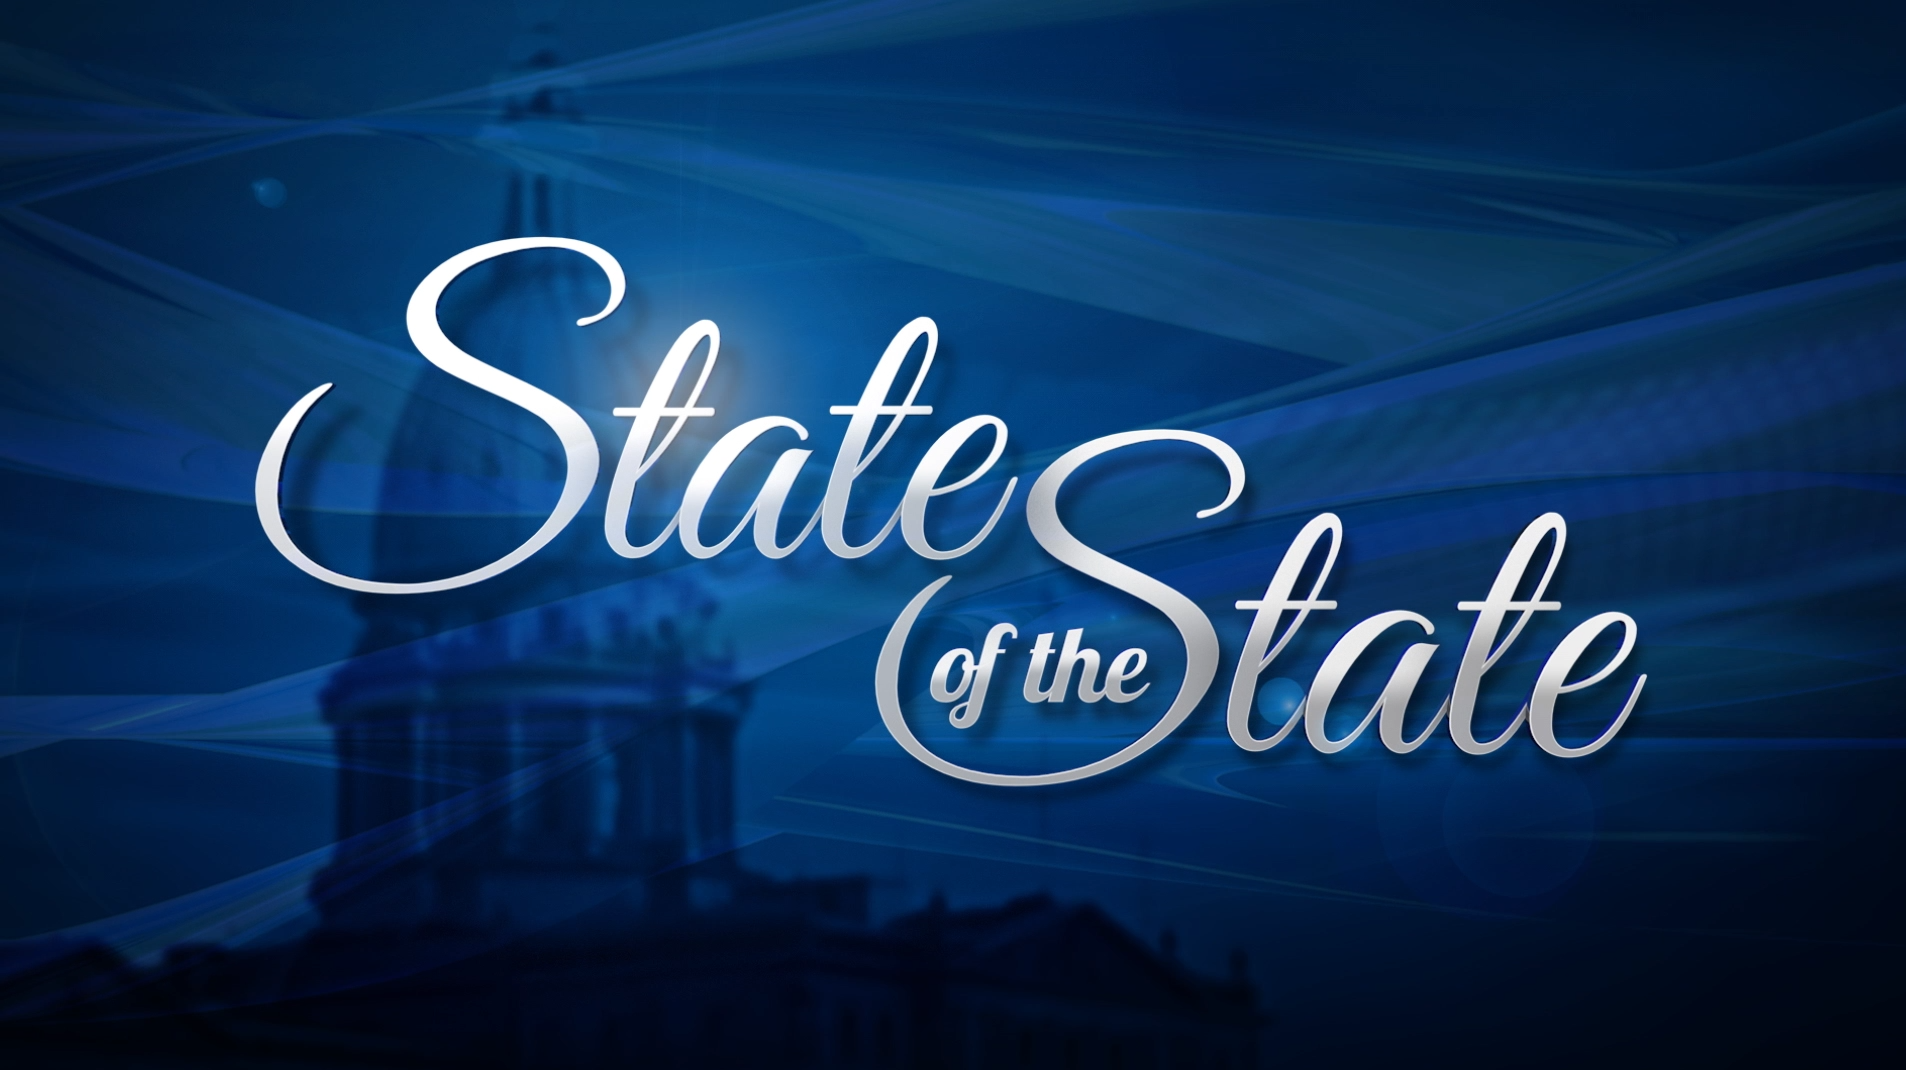 Michigan State of the State 2023 on Livestream